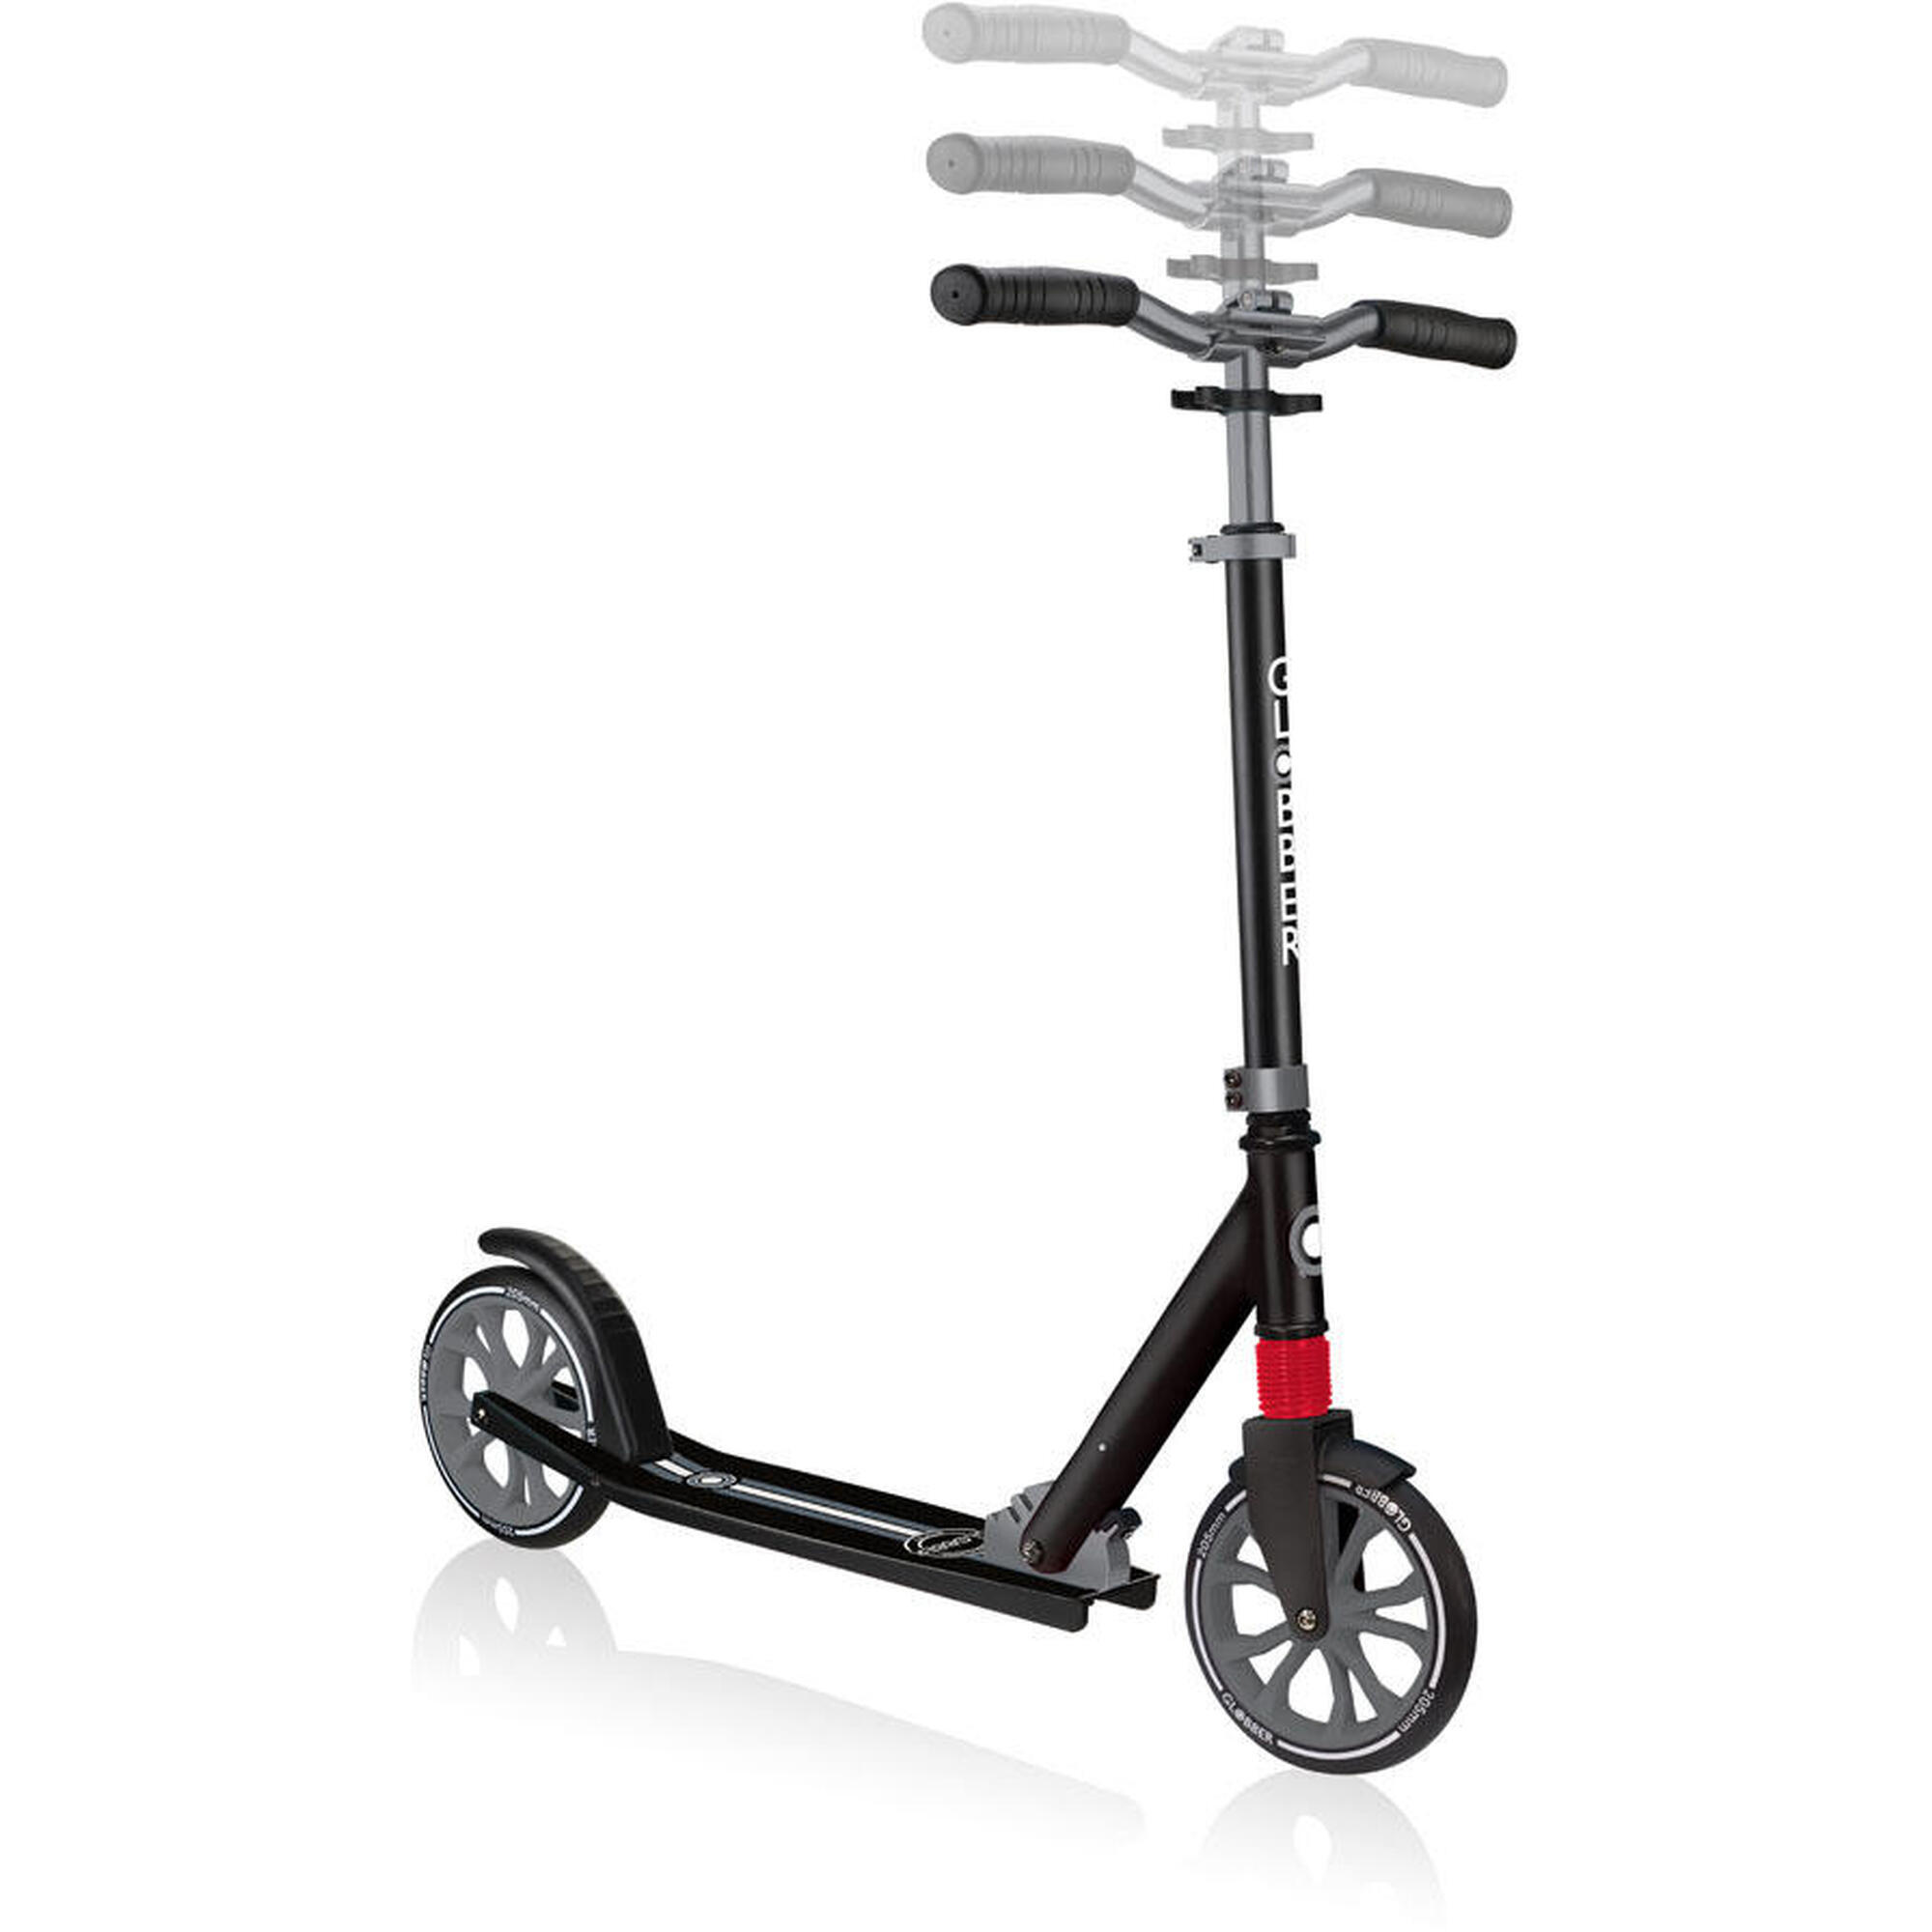 Scooter Scooter  NL 205  Black Grey